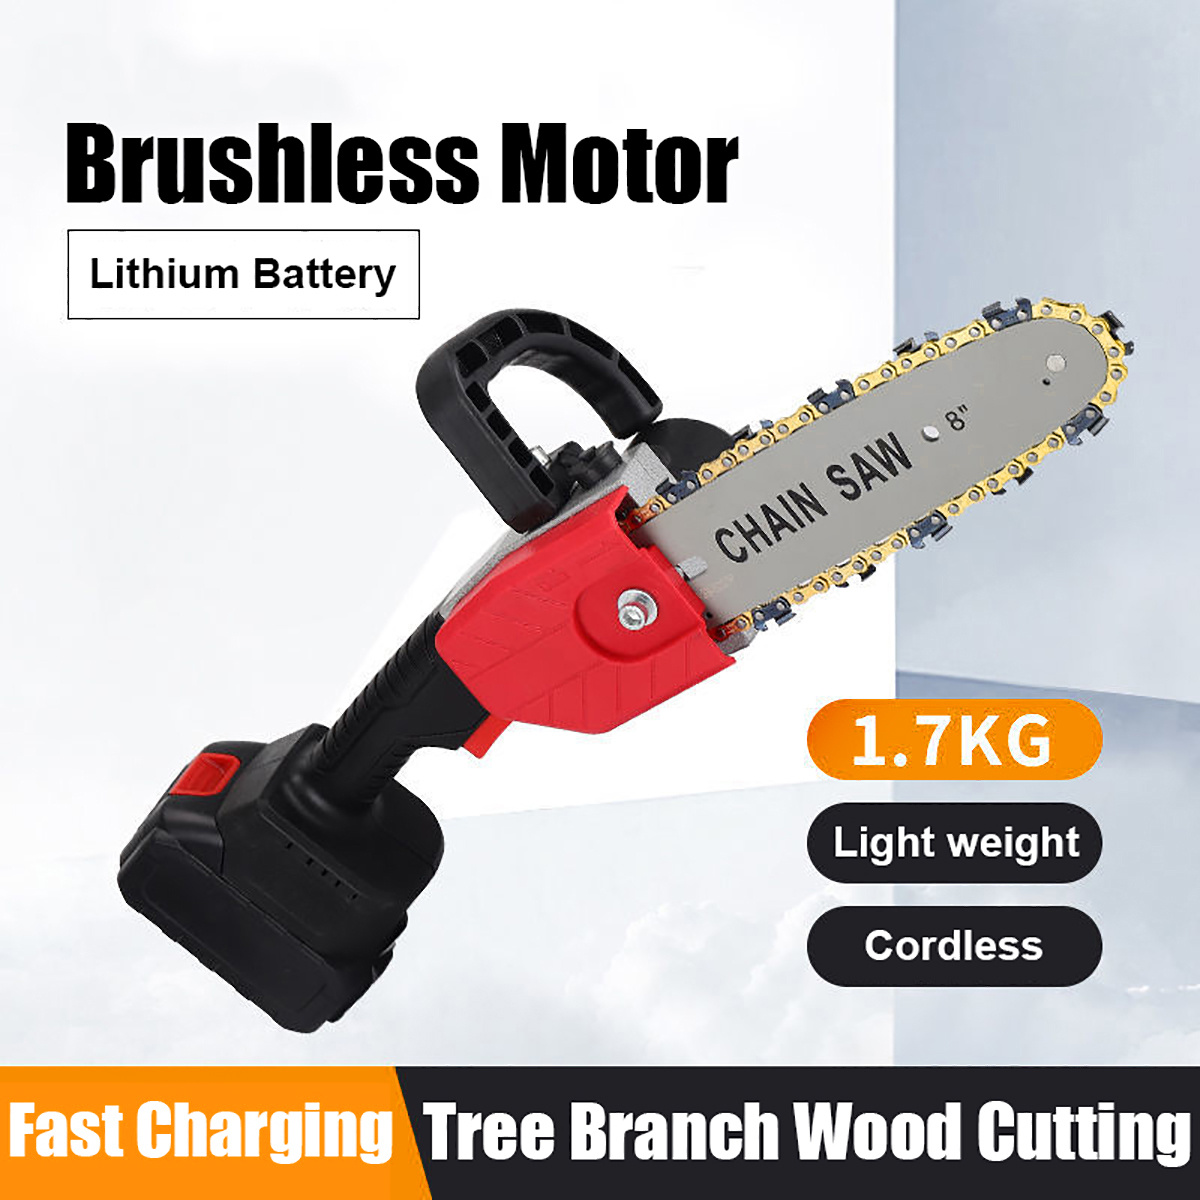 Mini-Chainsaw-8-Inch-21V-Portable-Brushless-Cordless-Electric-Chain-Saw-Handheld-Pruning-Shears-Chai-1795044-4